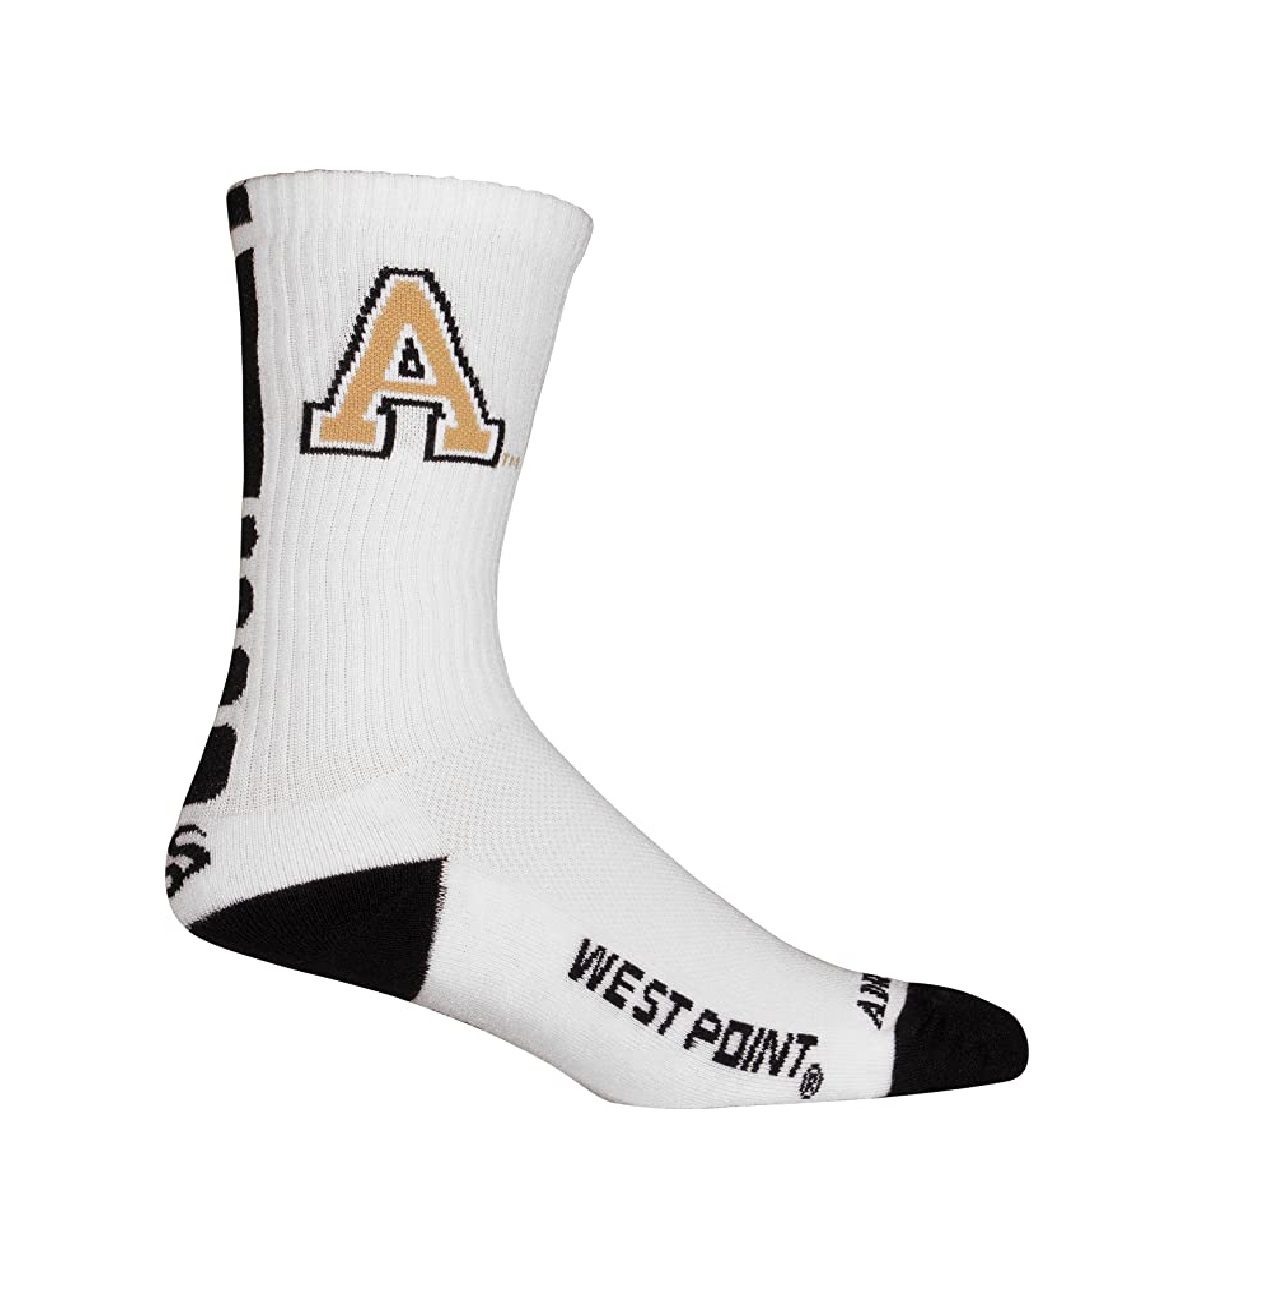 US Army West Point crew length-5" Multi Purpose Cycling  Socks